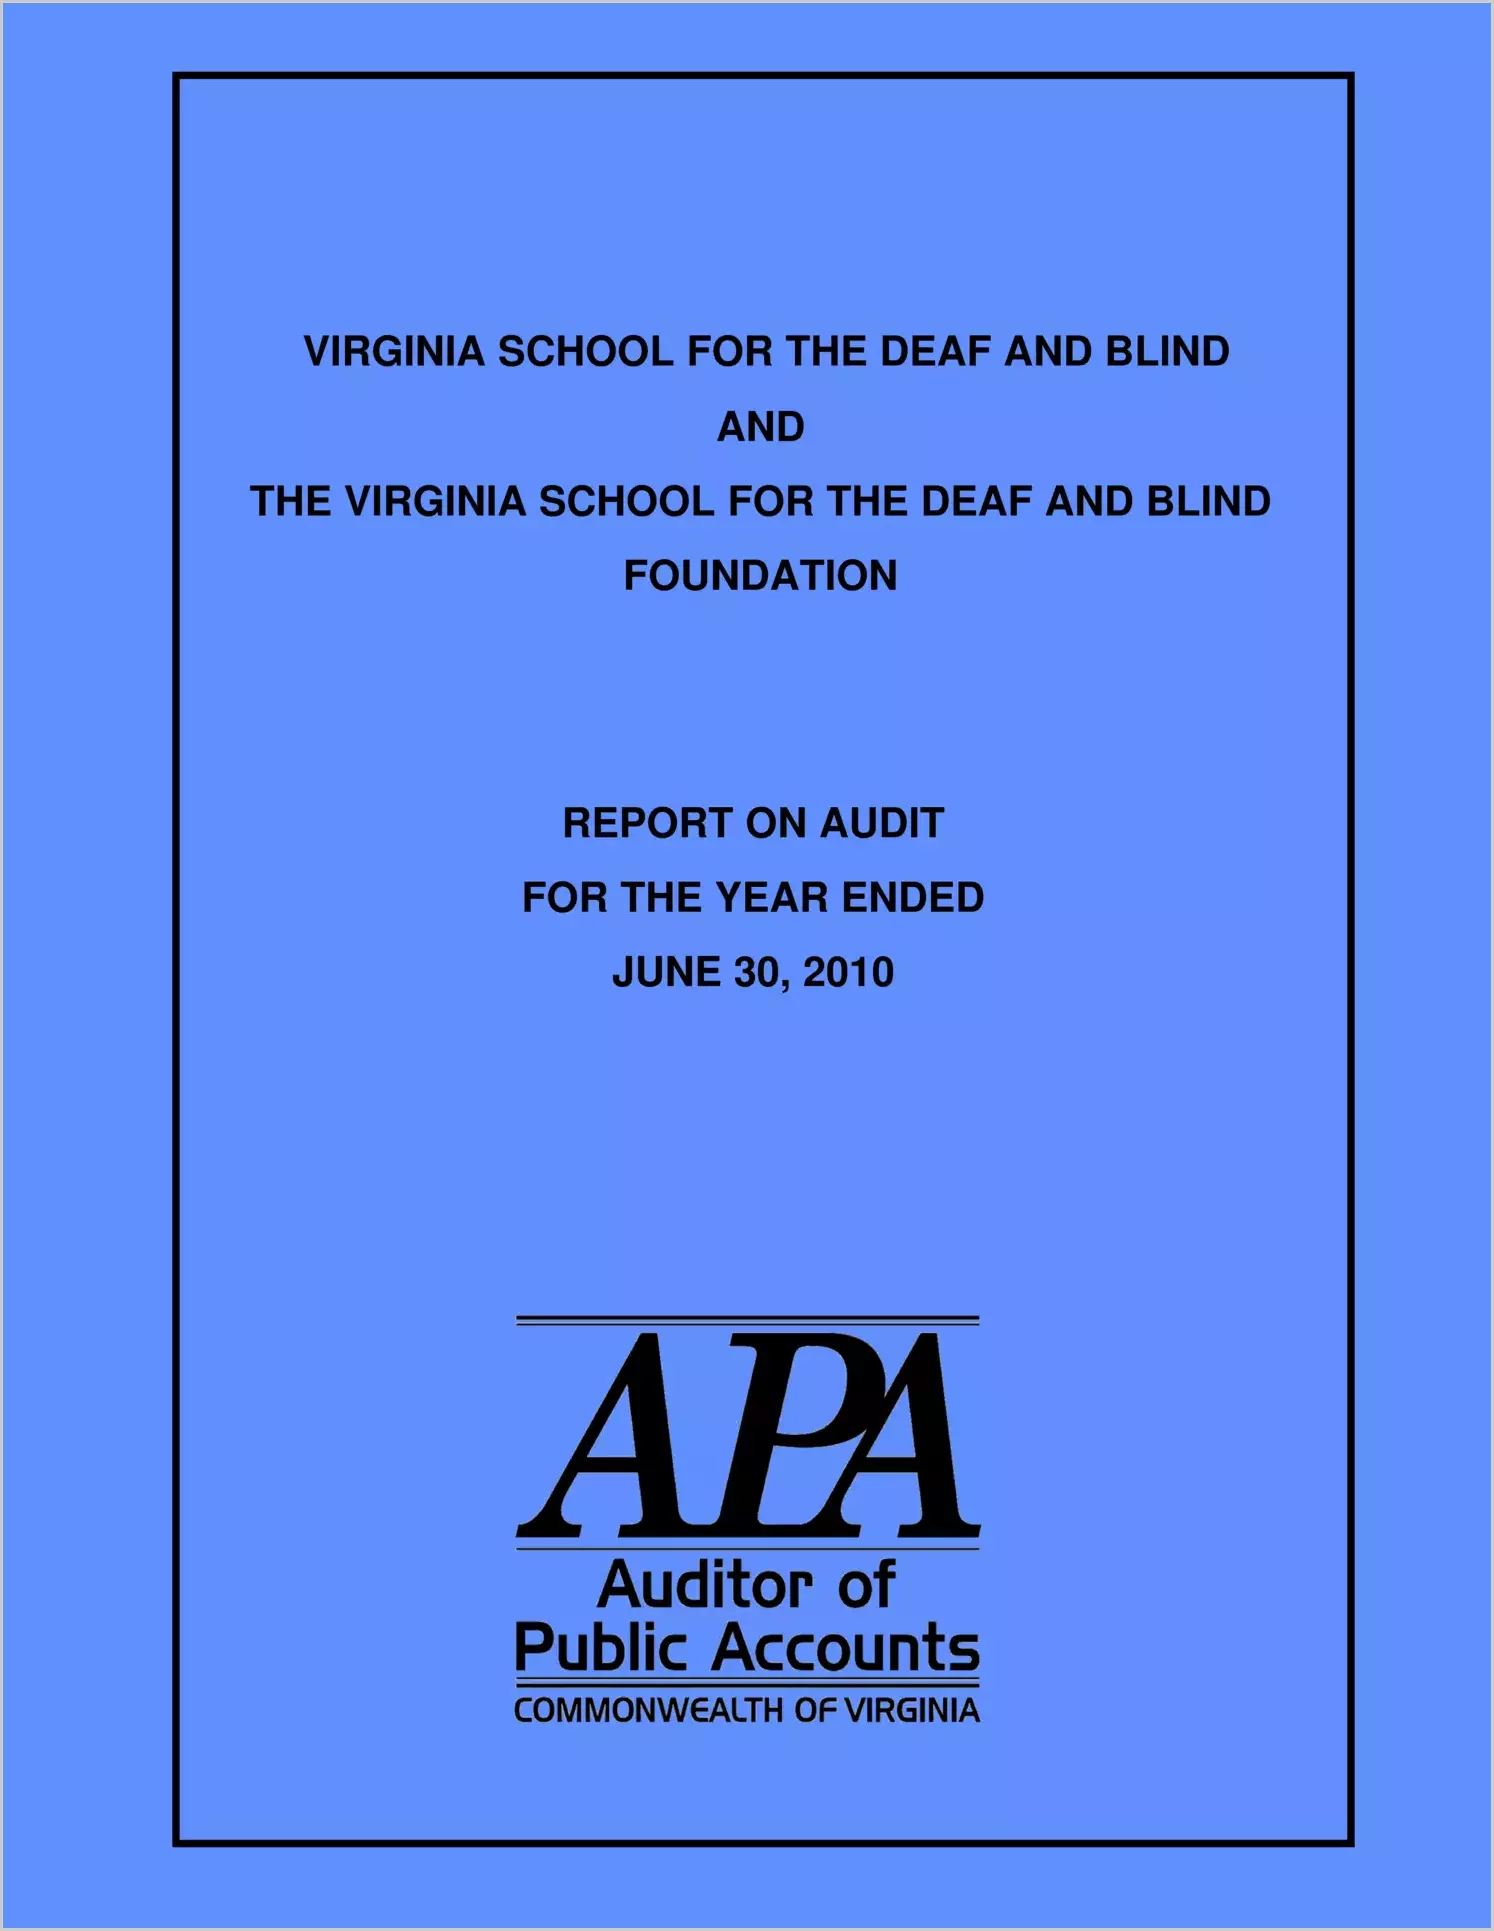 Virginia School for the Deaf and Blind and the Virginia School for the Deaf and Blind Foundation for the year ended June 30, 2010